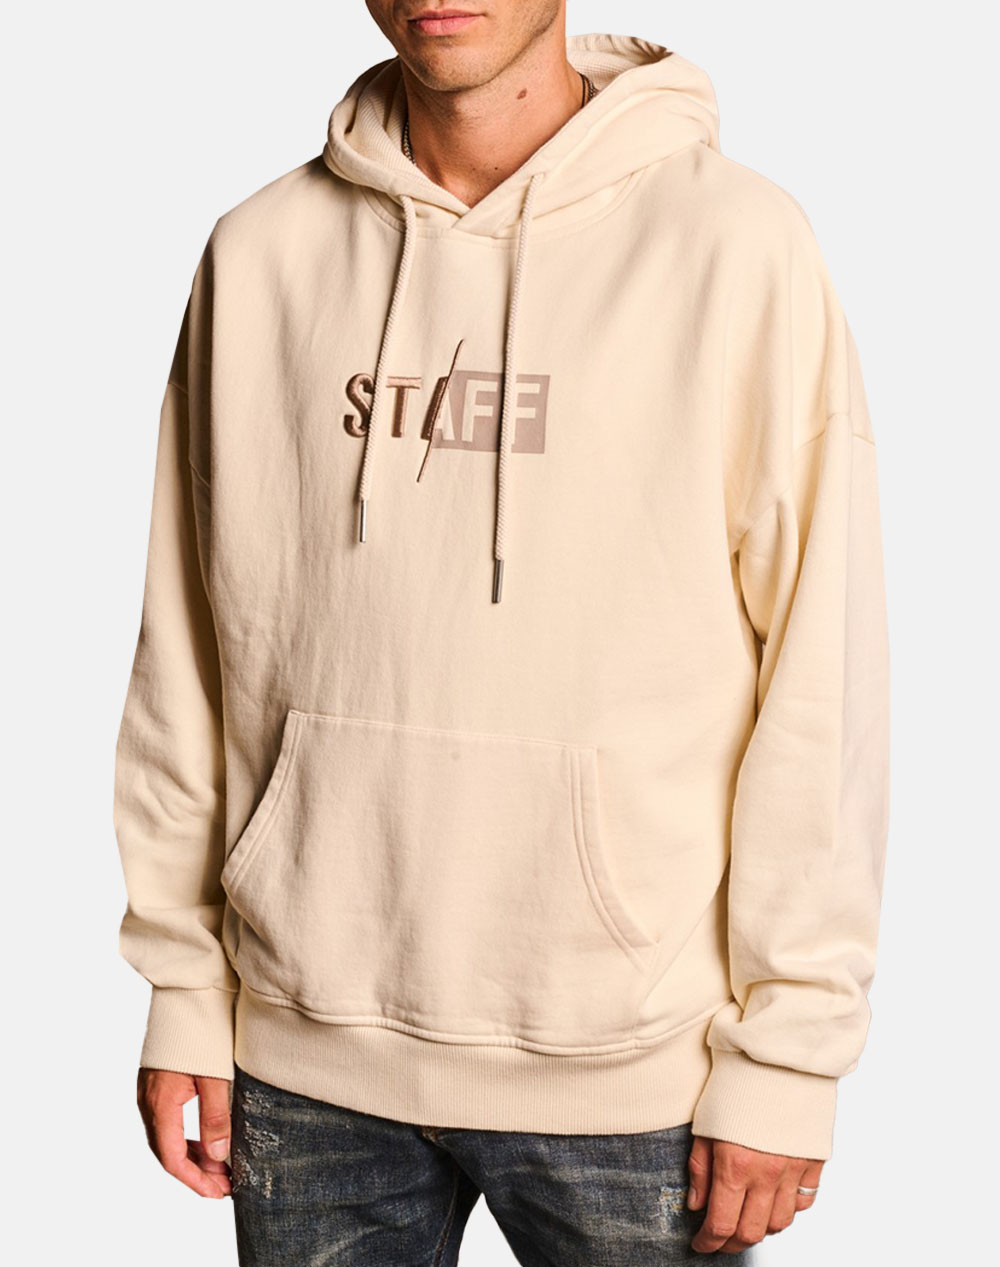 STAFF STAFF Cosmo Man Hoodie 64-106.050-Ν0024 OffWhite